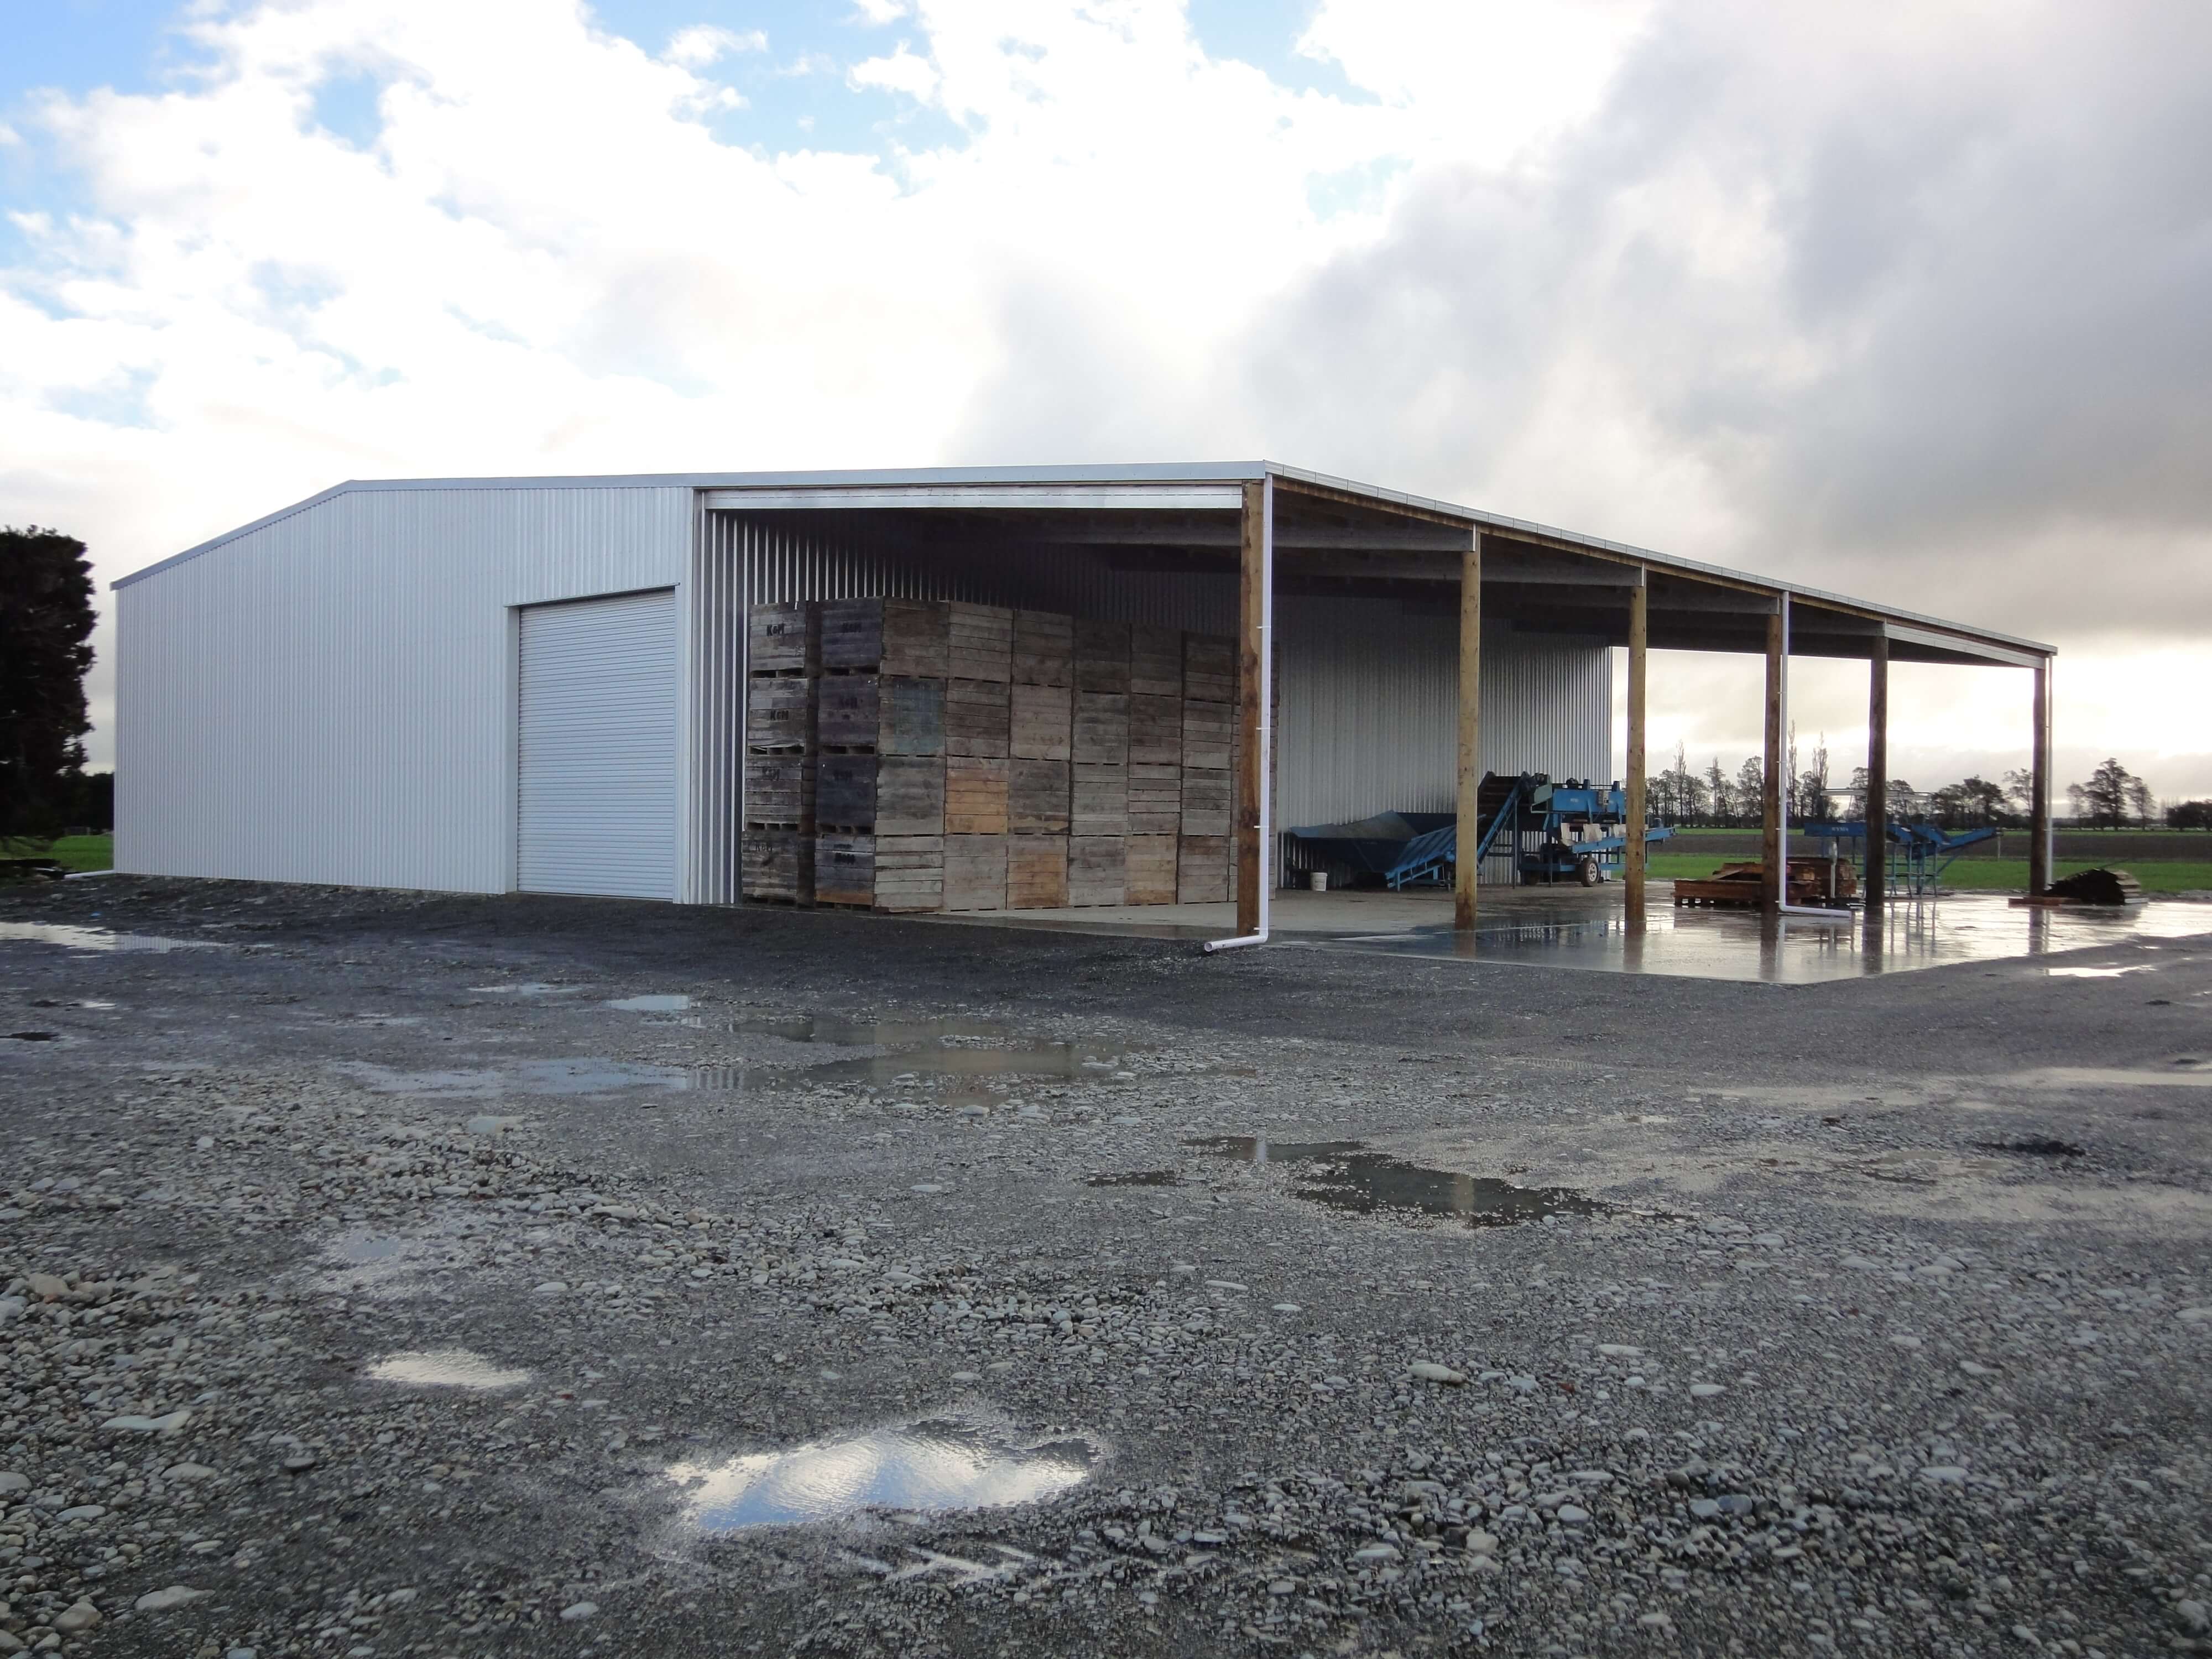 Produce sheds can be designed with a combination of open bays and closed bays